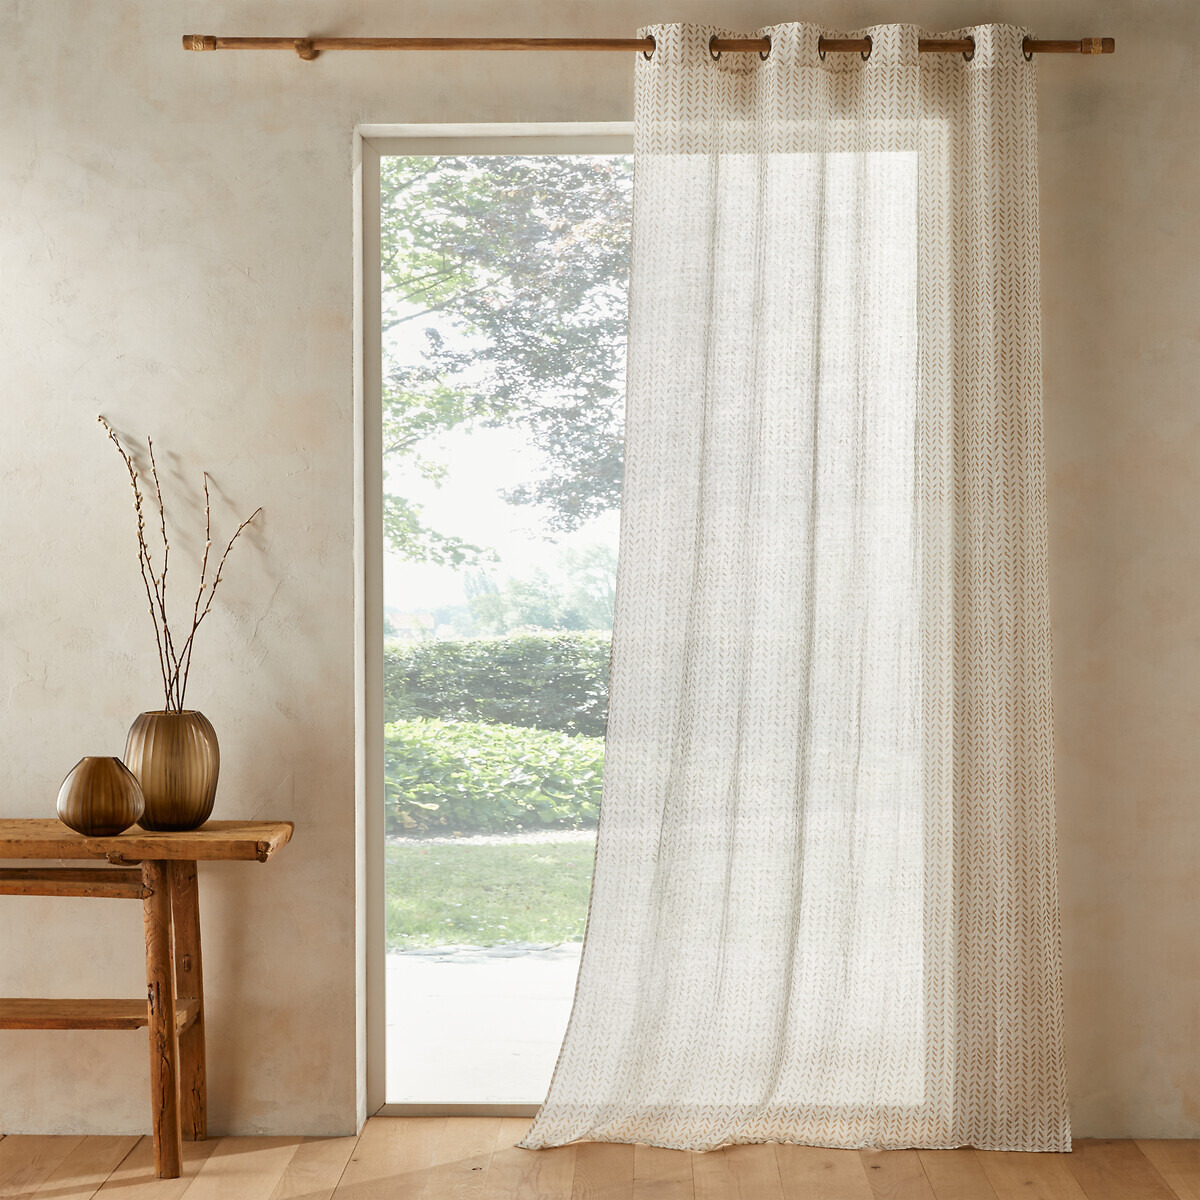 Puyconnie Single Linen Voile Eyelet Panel - image 1